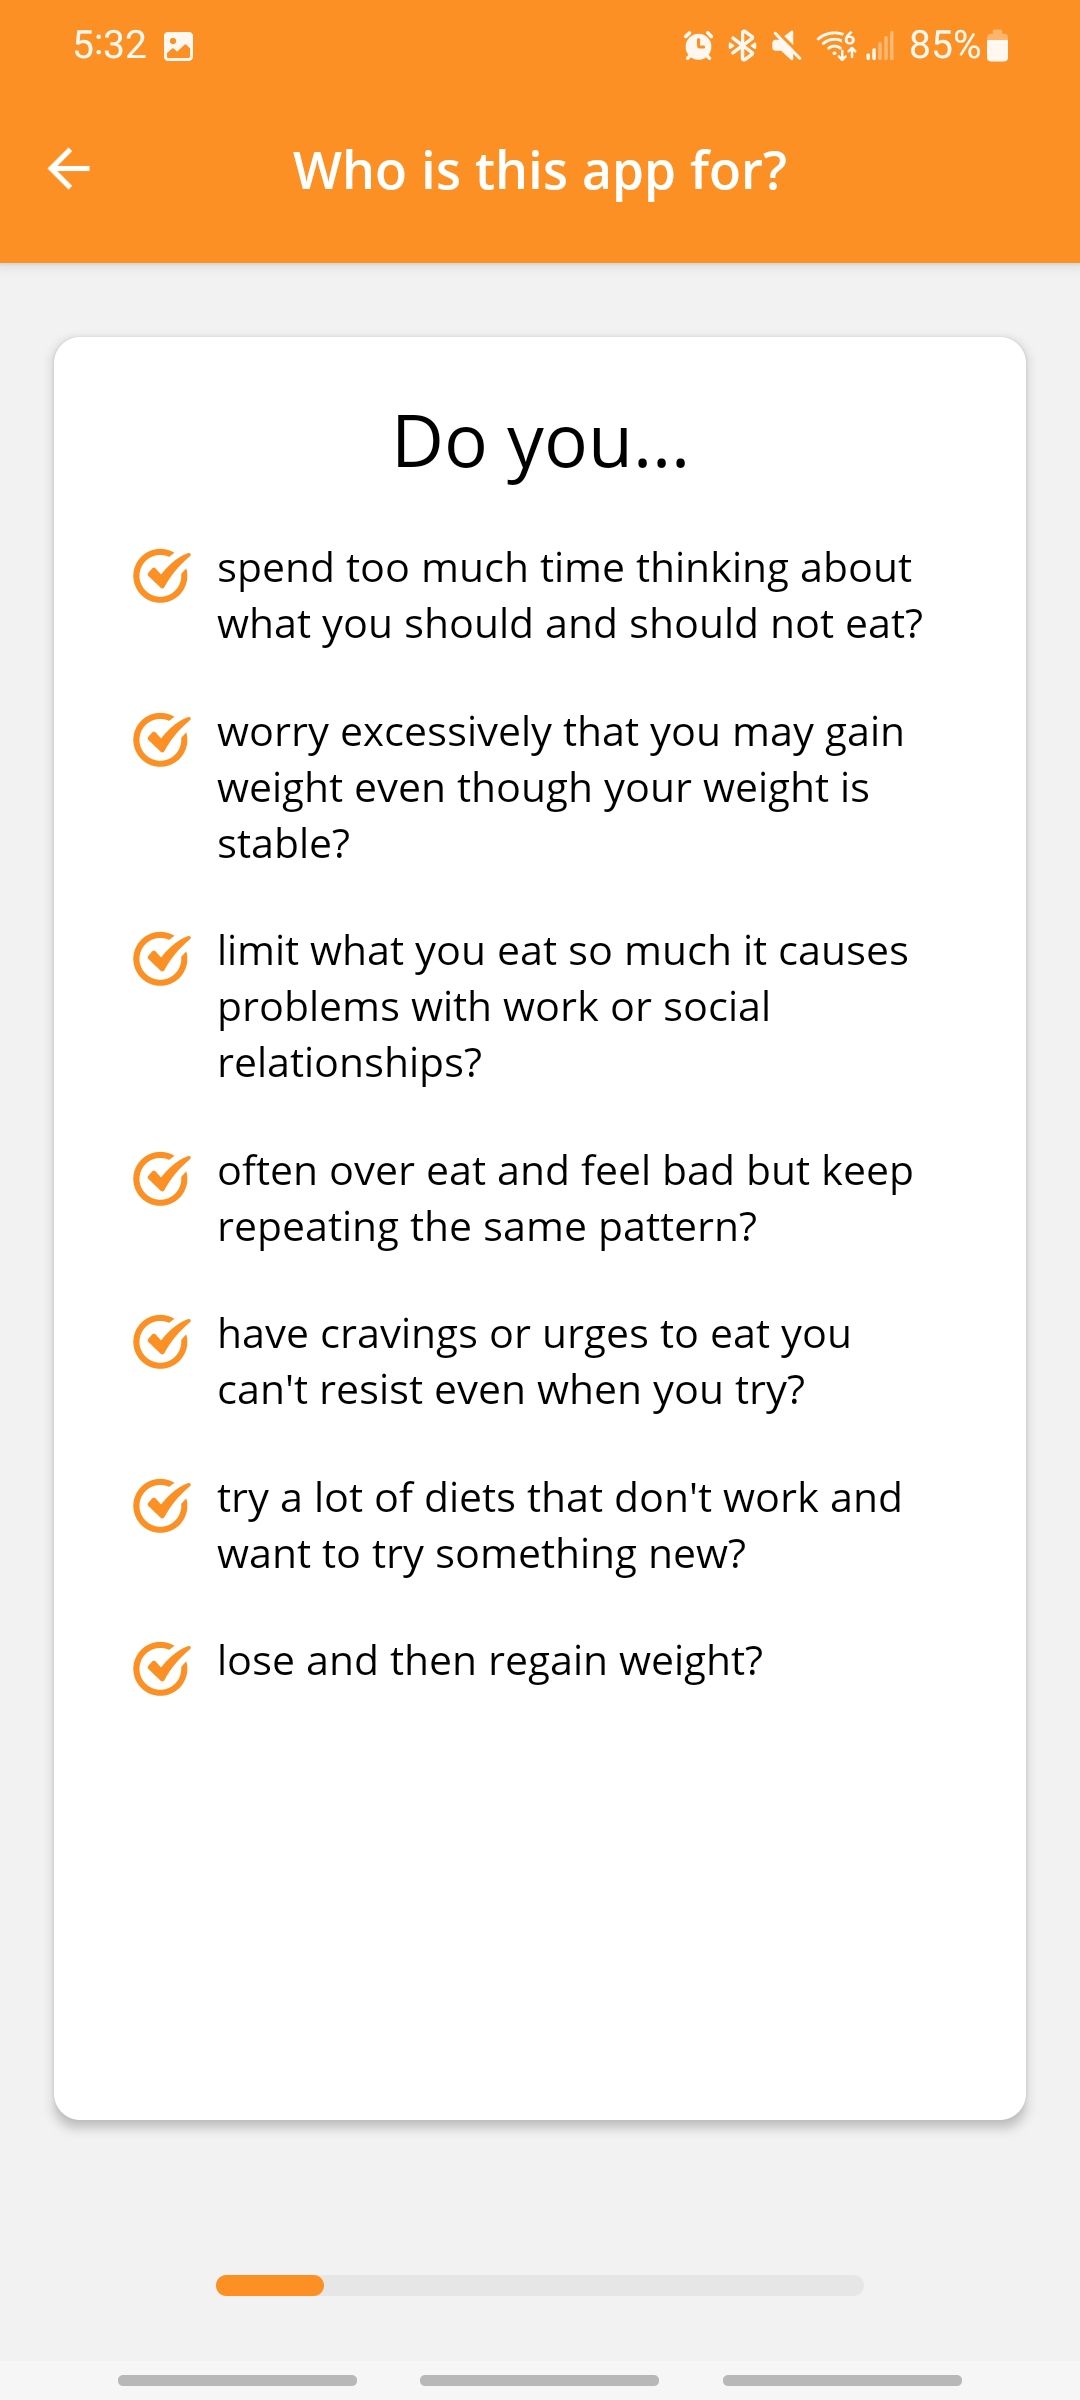 questions in mindful eating coach app to help you figure out whether the app is for you